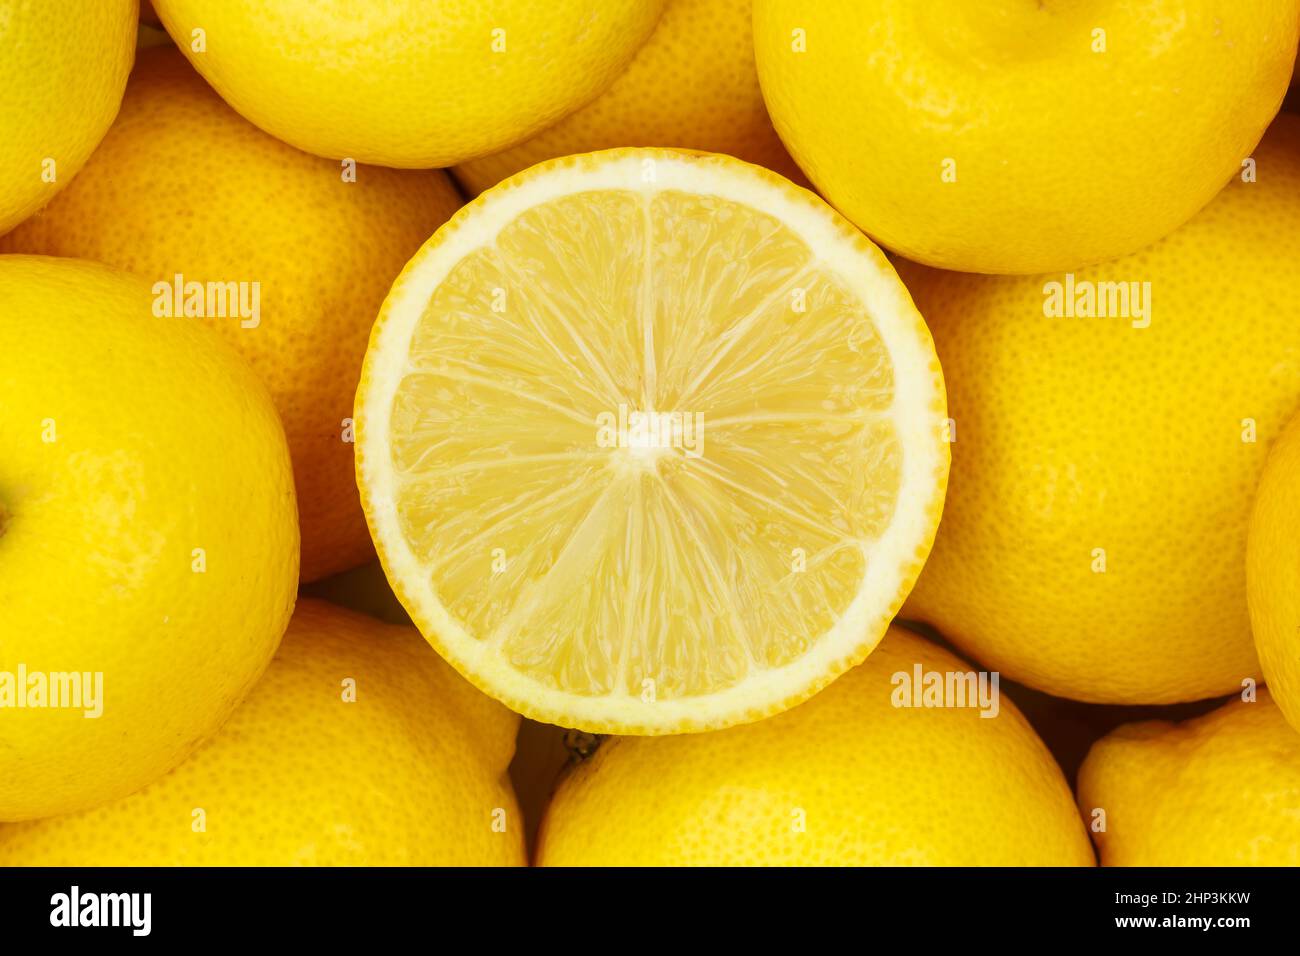 Lemon fruits lemons fruit background from above top view Stock Photo